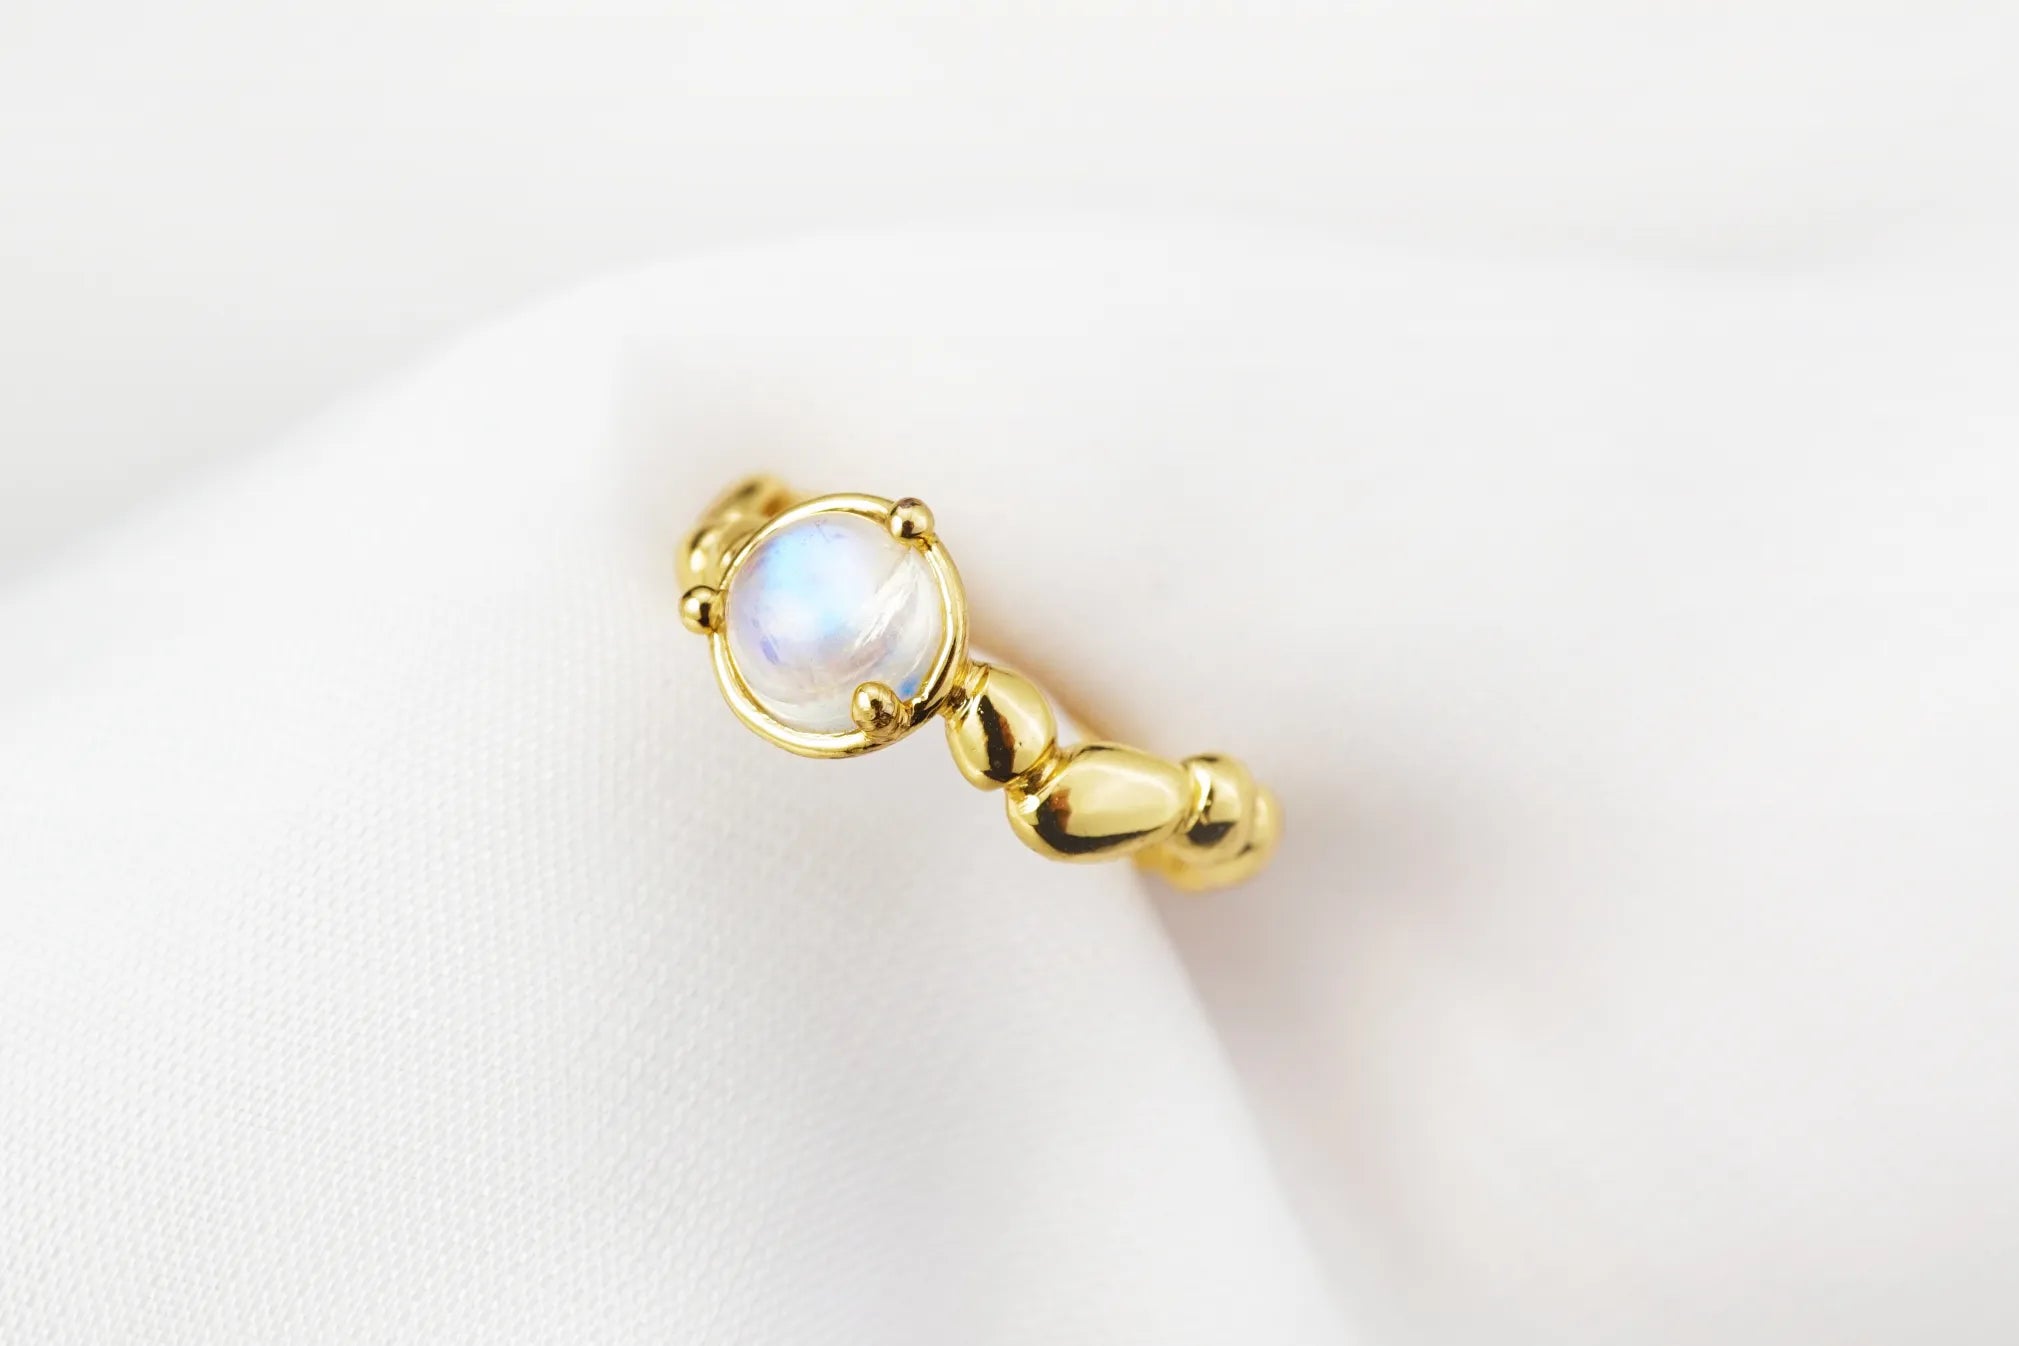 Chia Jewelry gem stones rings design collection.One of a kind gold moonstone simple and artistic bean pebbles statement ring.